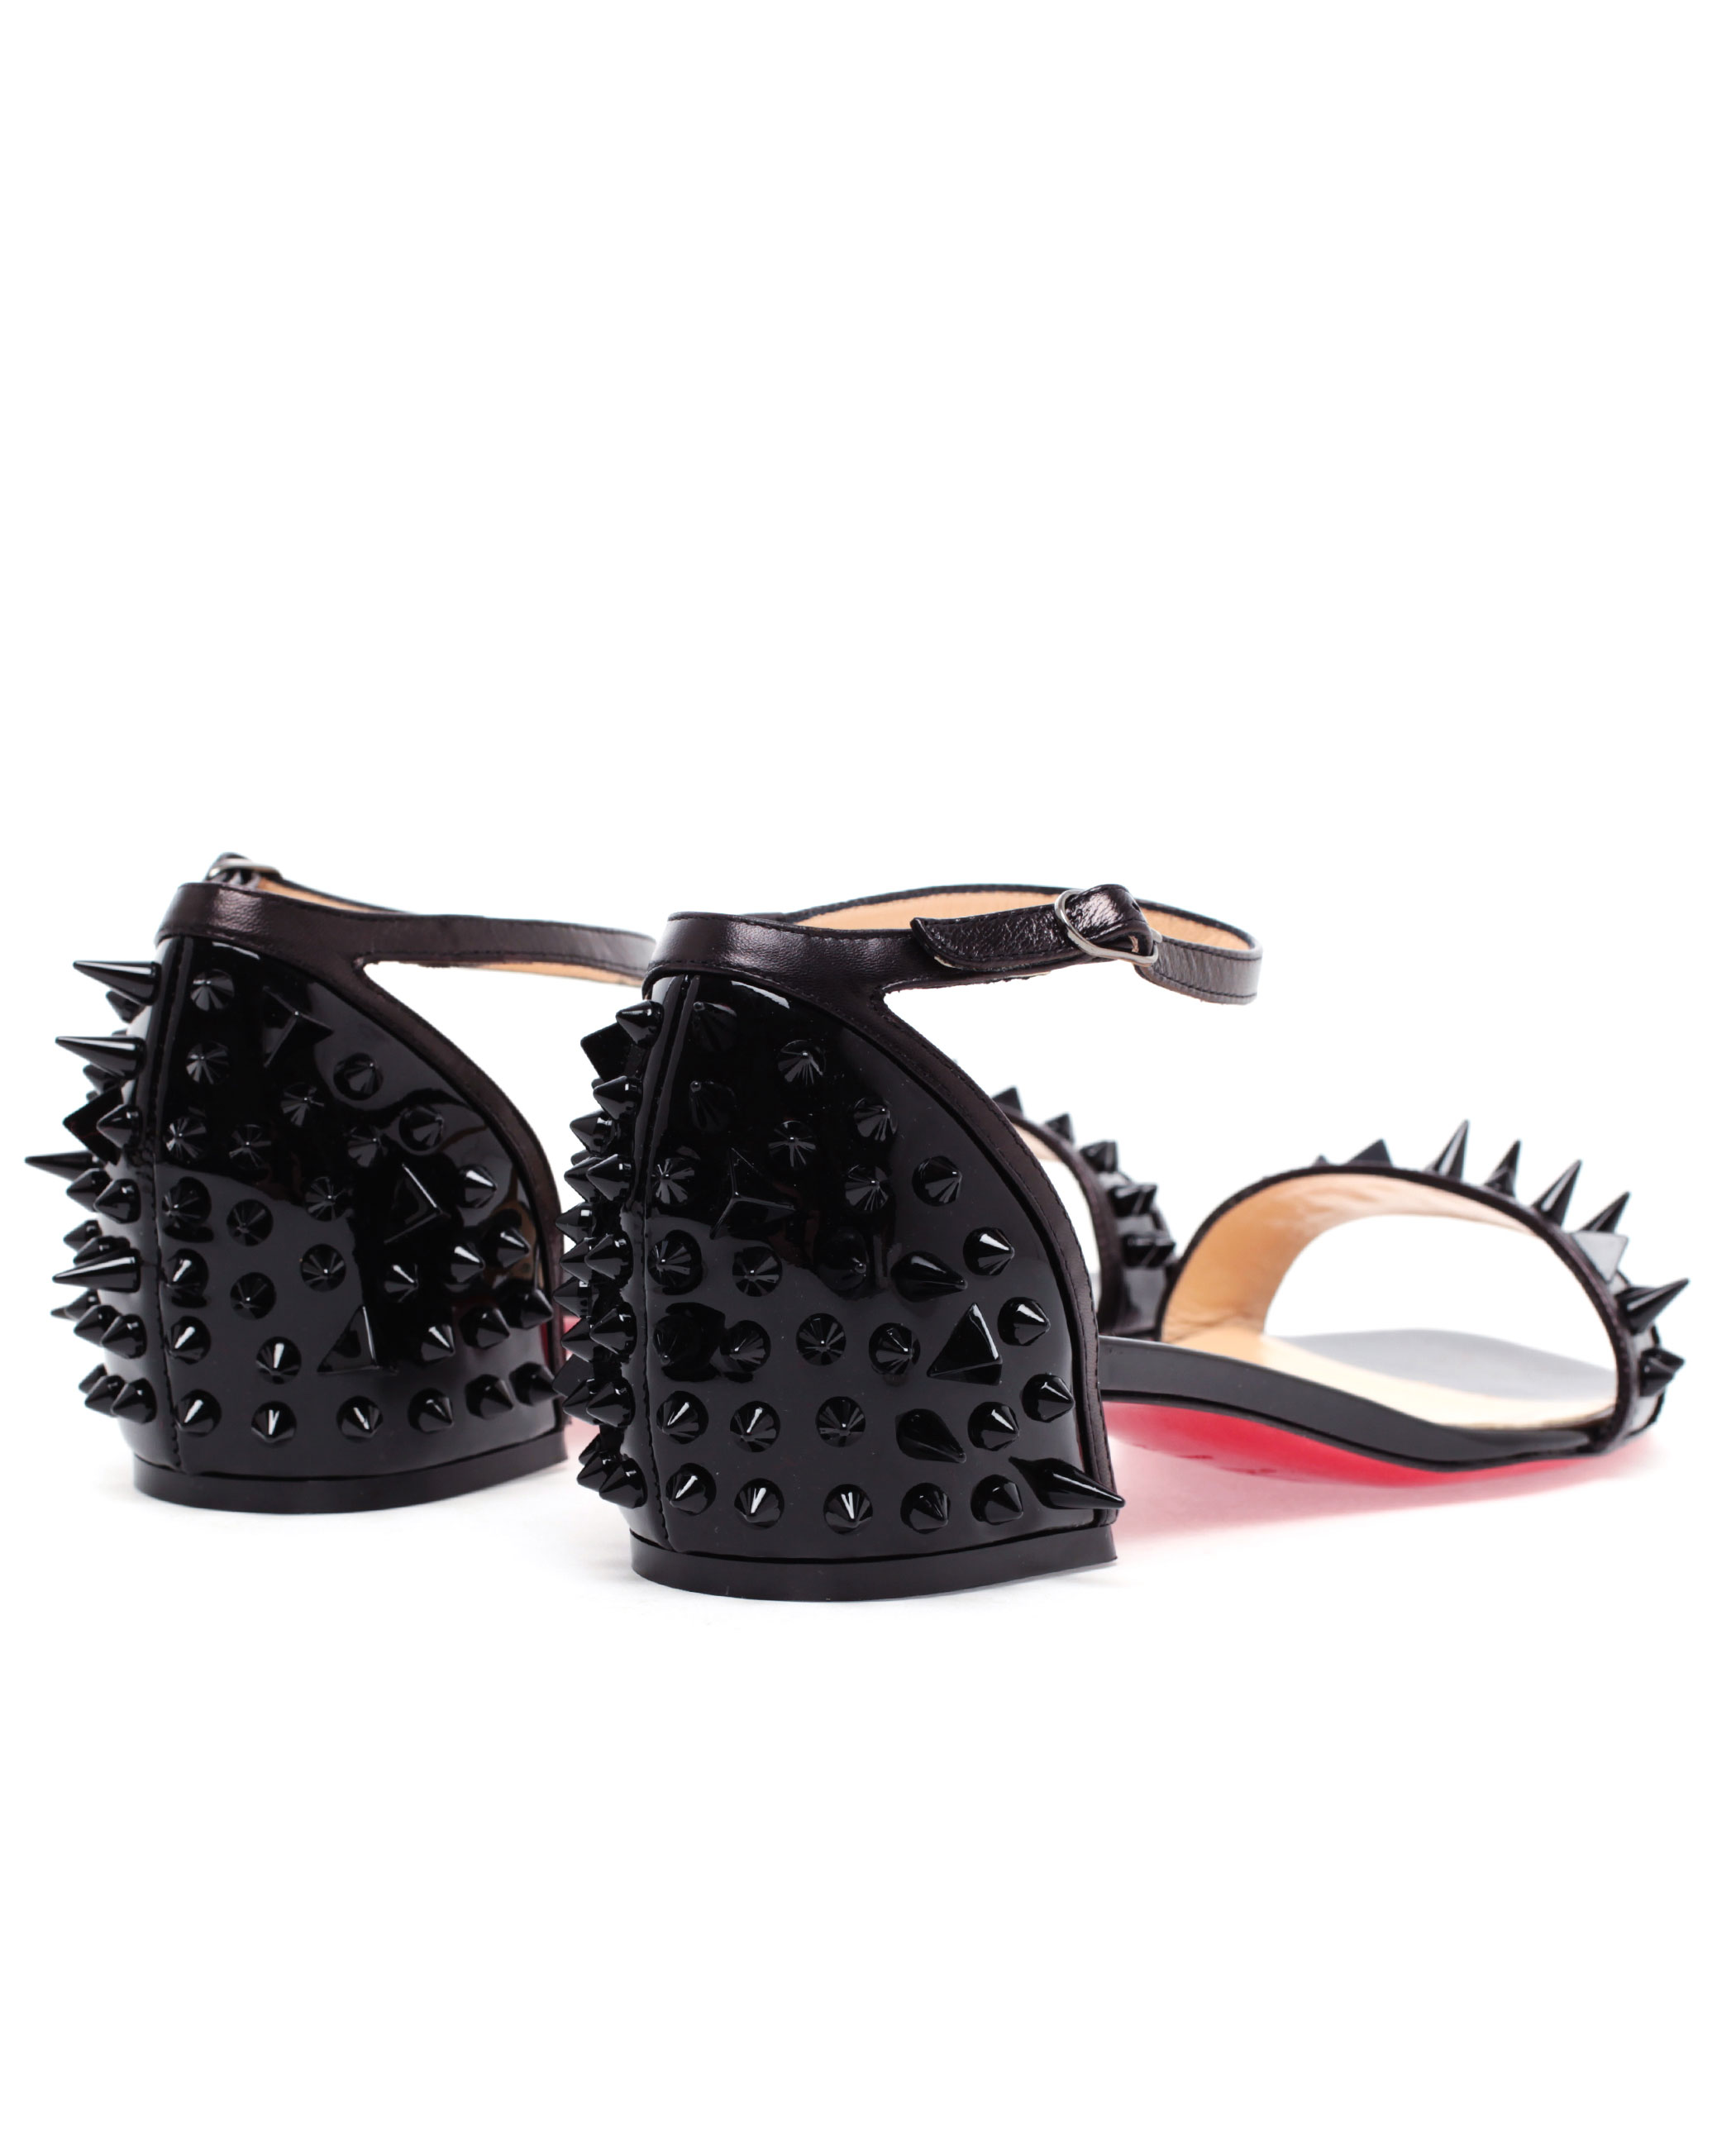 christian louboutin Druide Spike sandals Black patent leather ...  